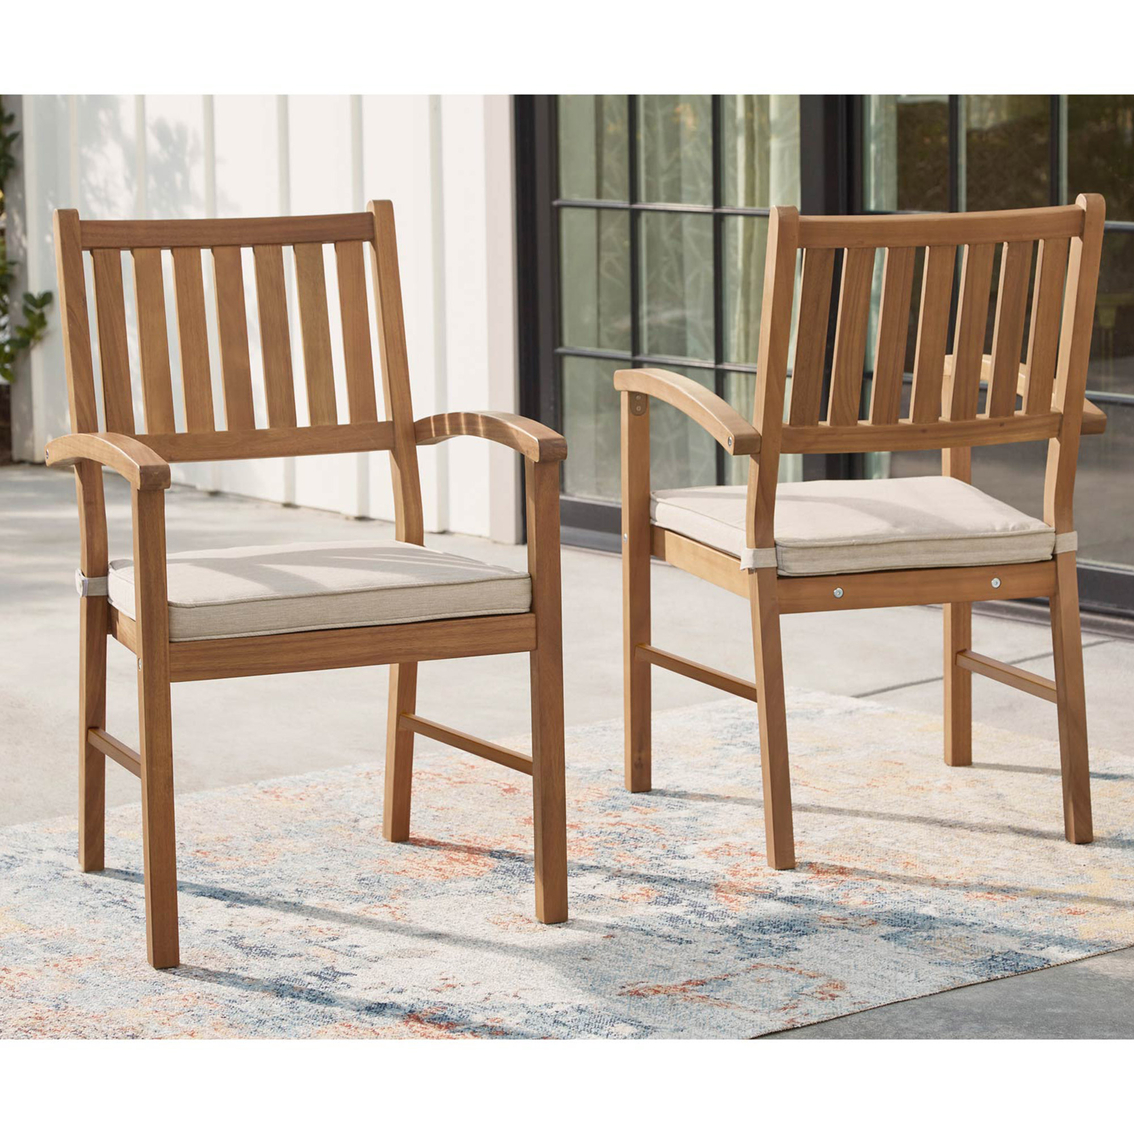 Signature Design by Ashley Janiyah Outdoor Dining Arm Chairs with Cushions 2 pk. - Image 4 of 7